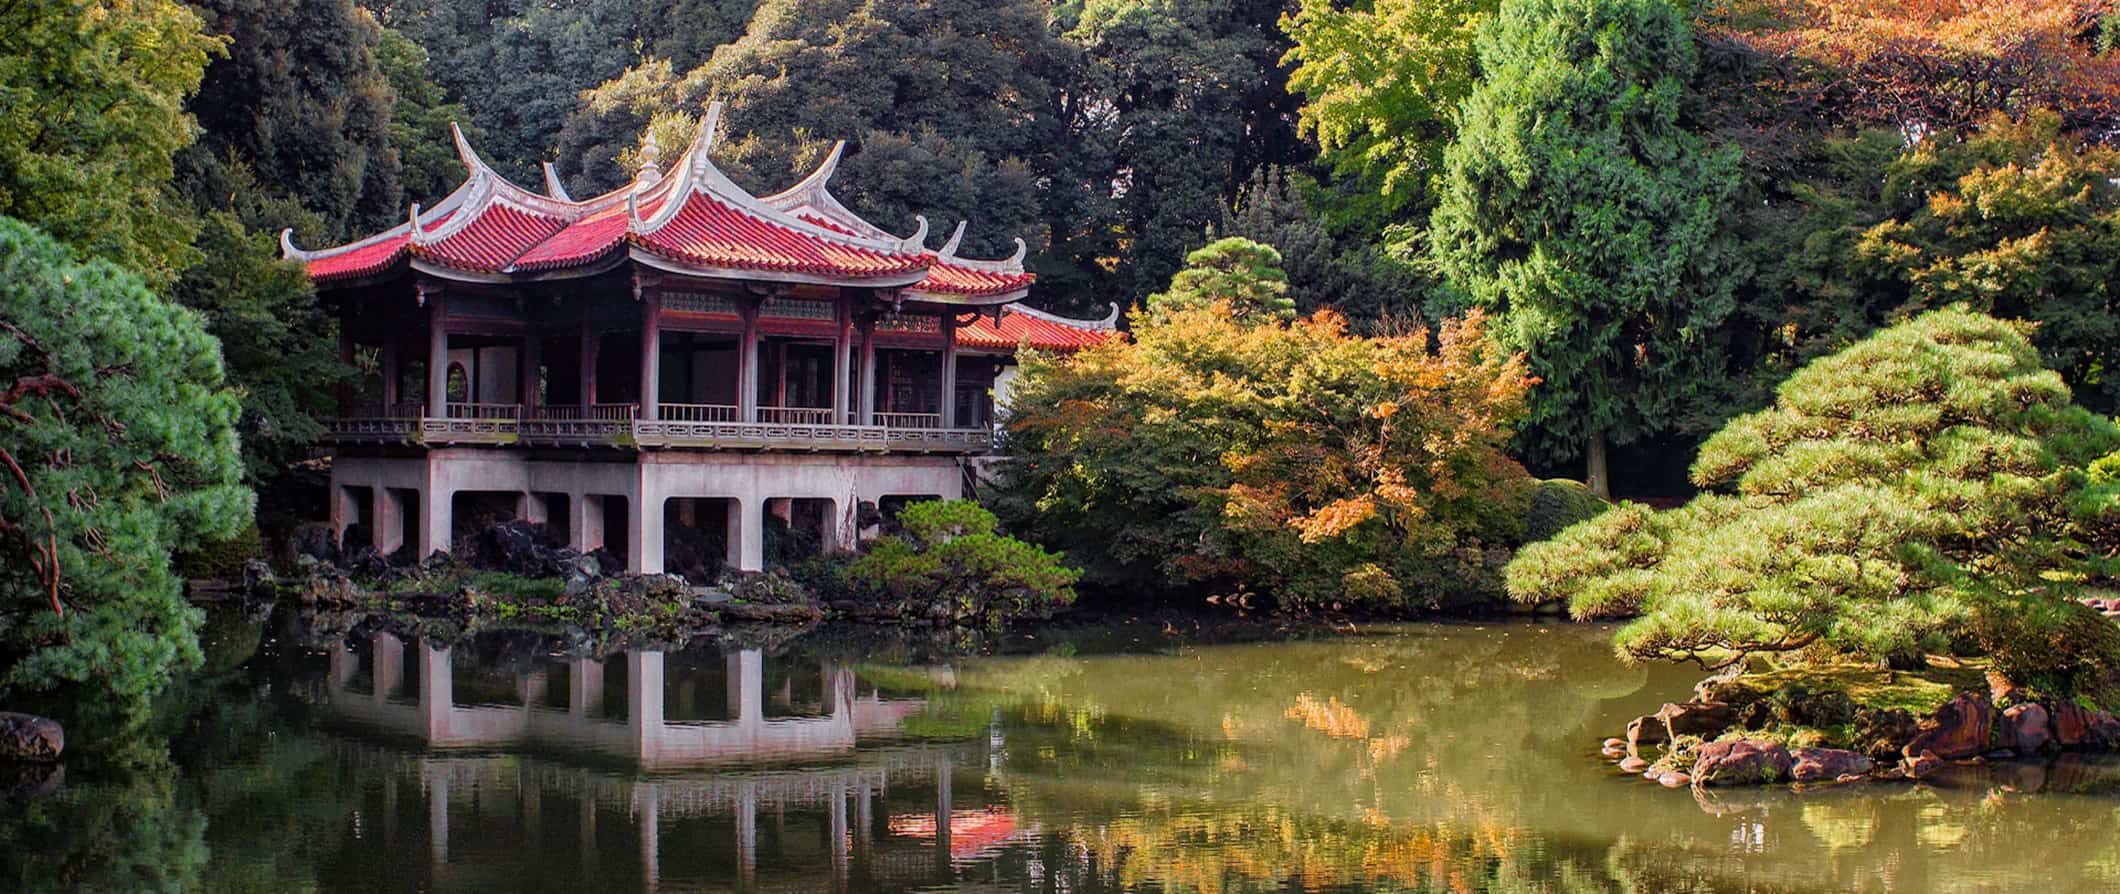 an old temple in Japan surrounded by lush trees near a small lake